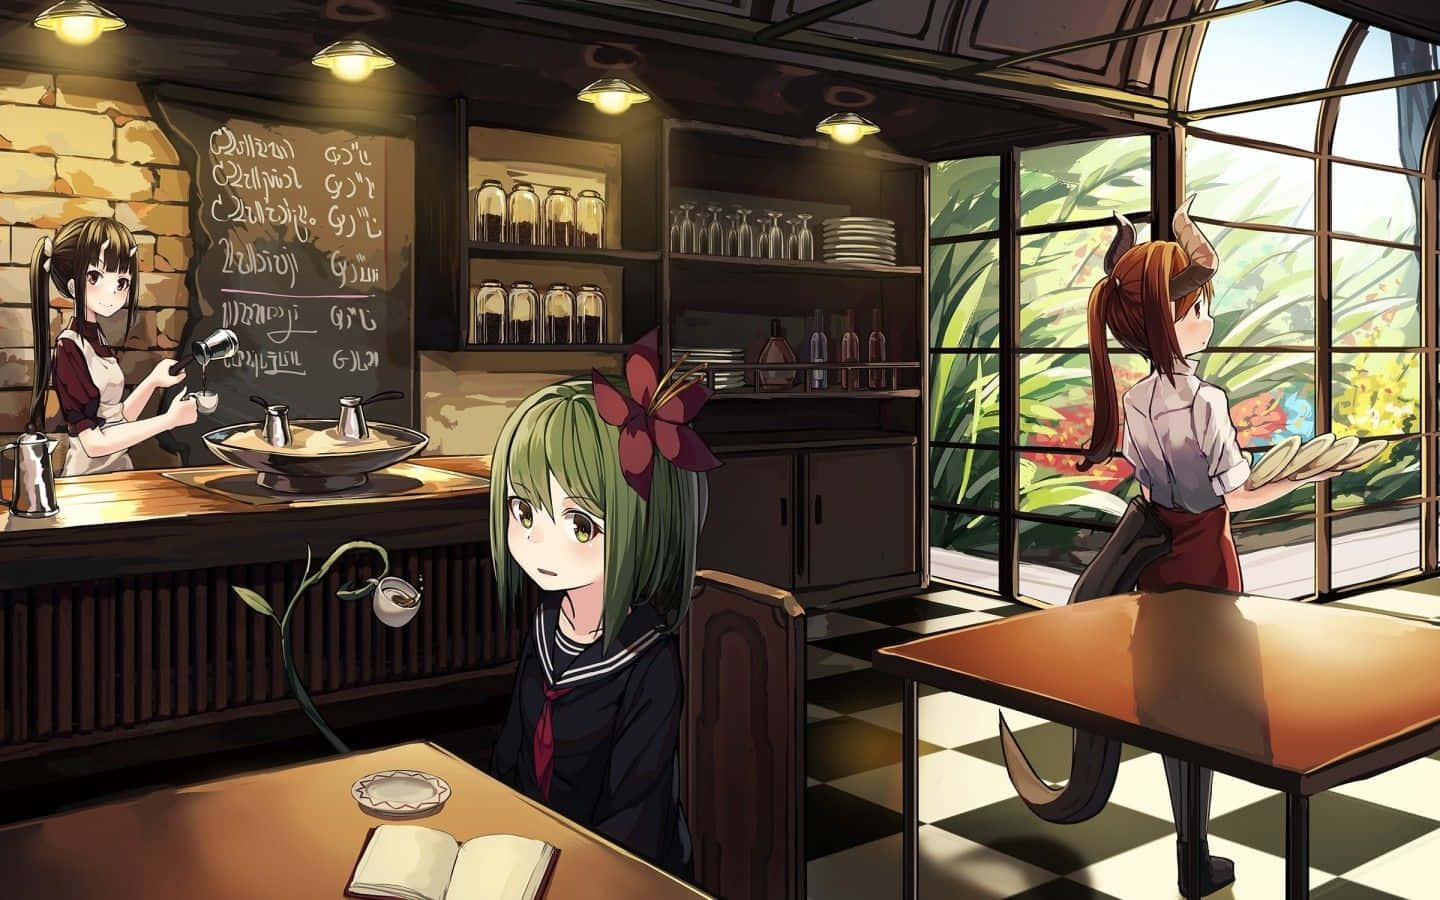 Craving a coffee in a unique atmosphere? Visit Cafe Anime, now serving your favorite beverages in a vibrant anime-inspired setting! Wallpaper